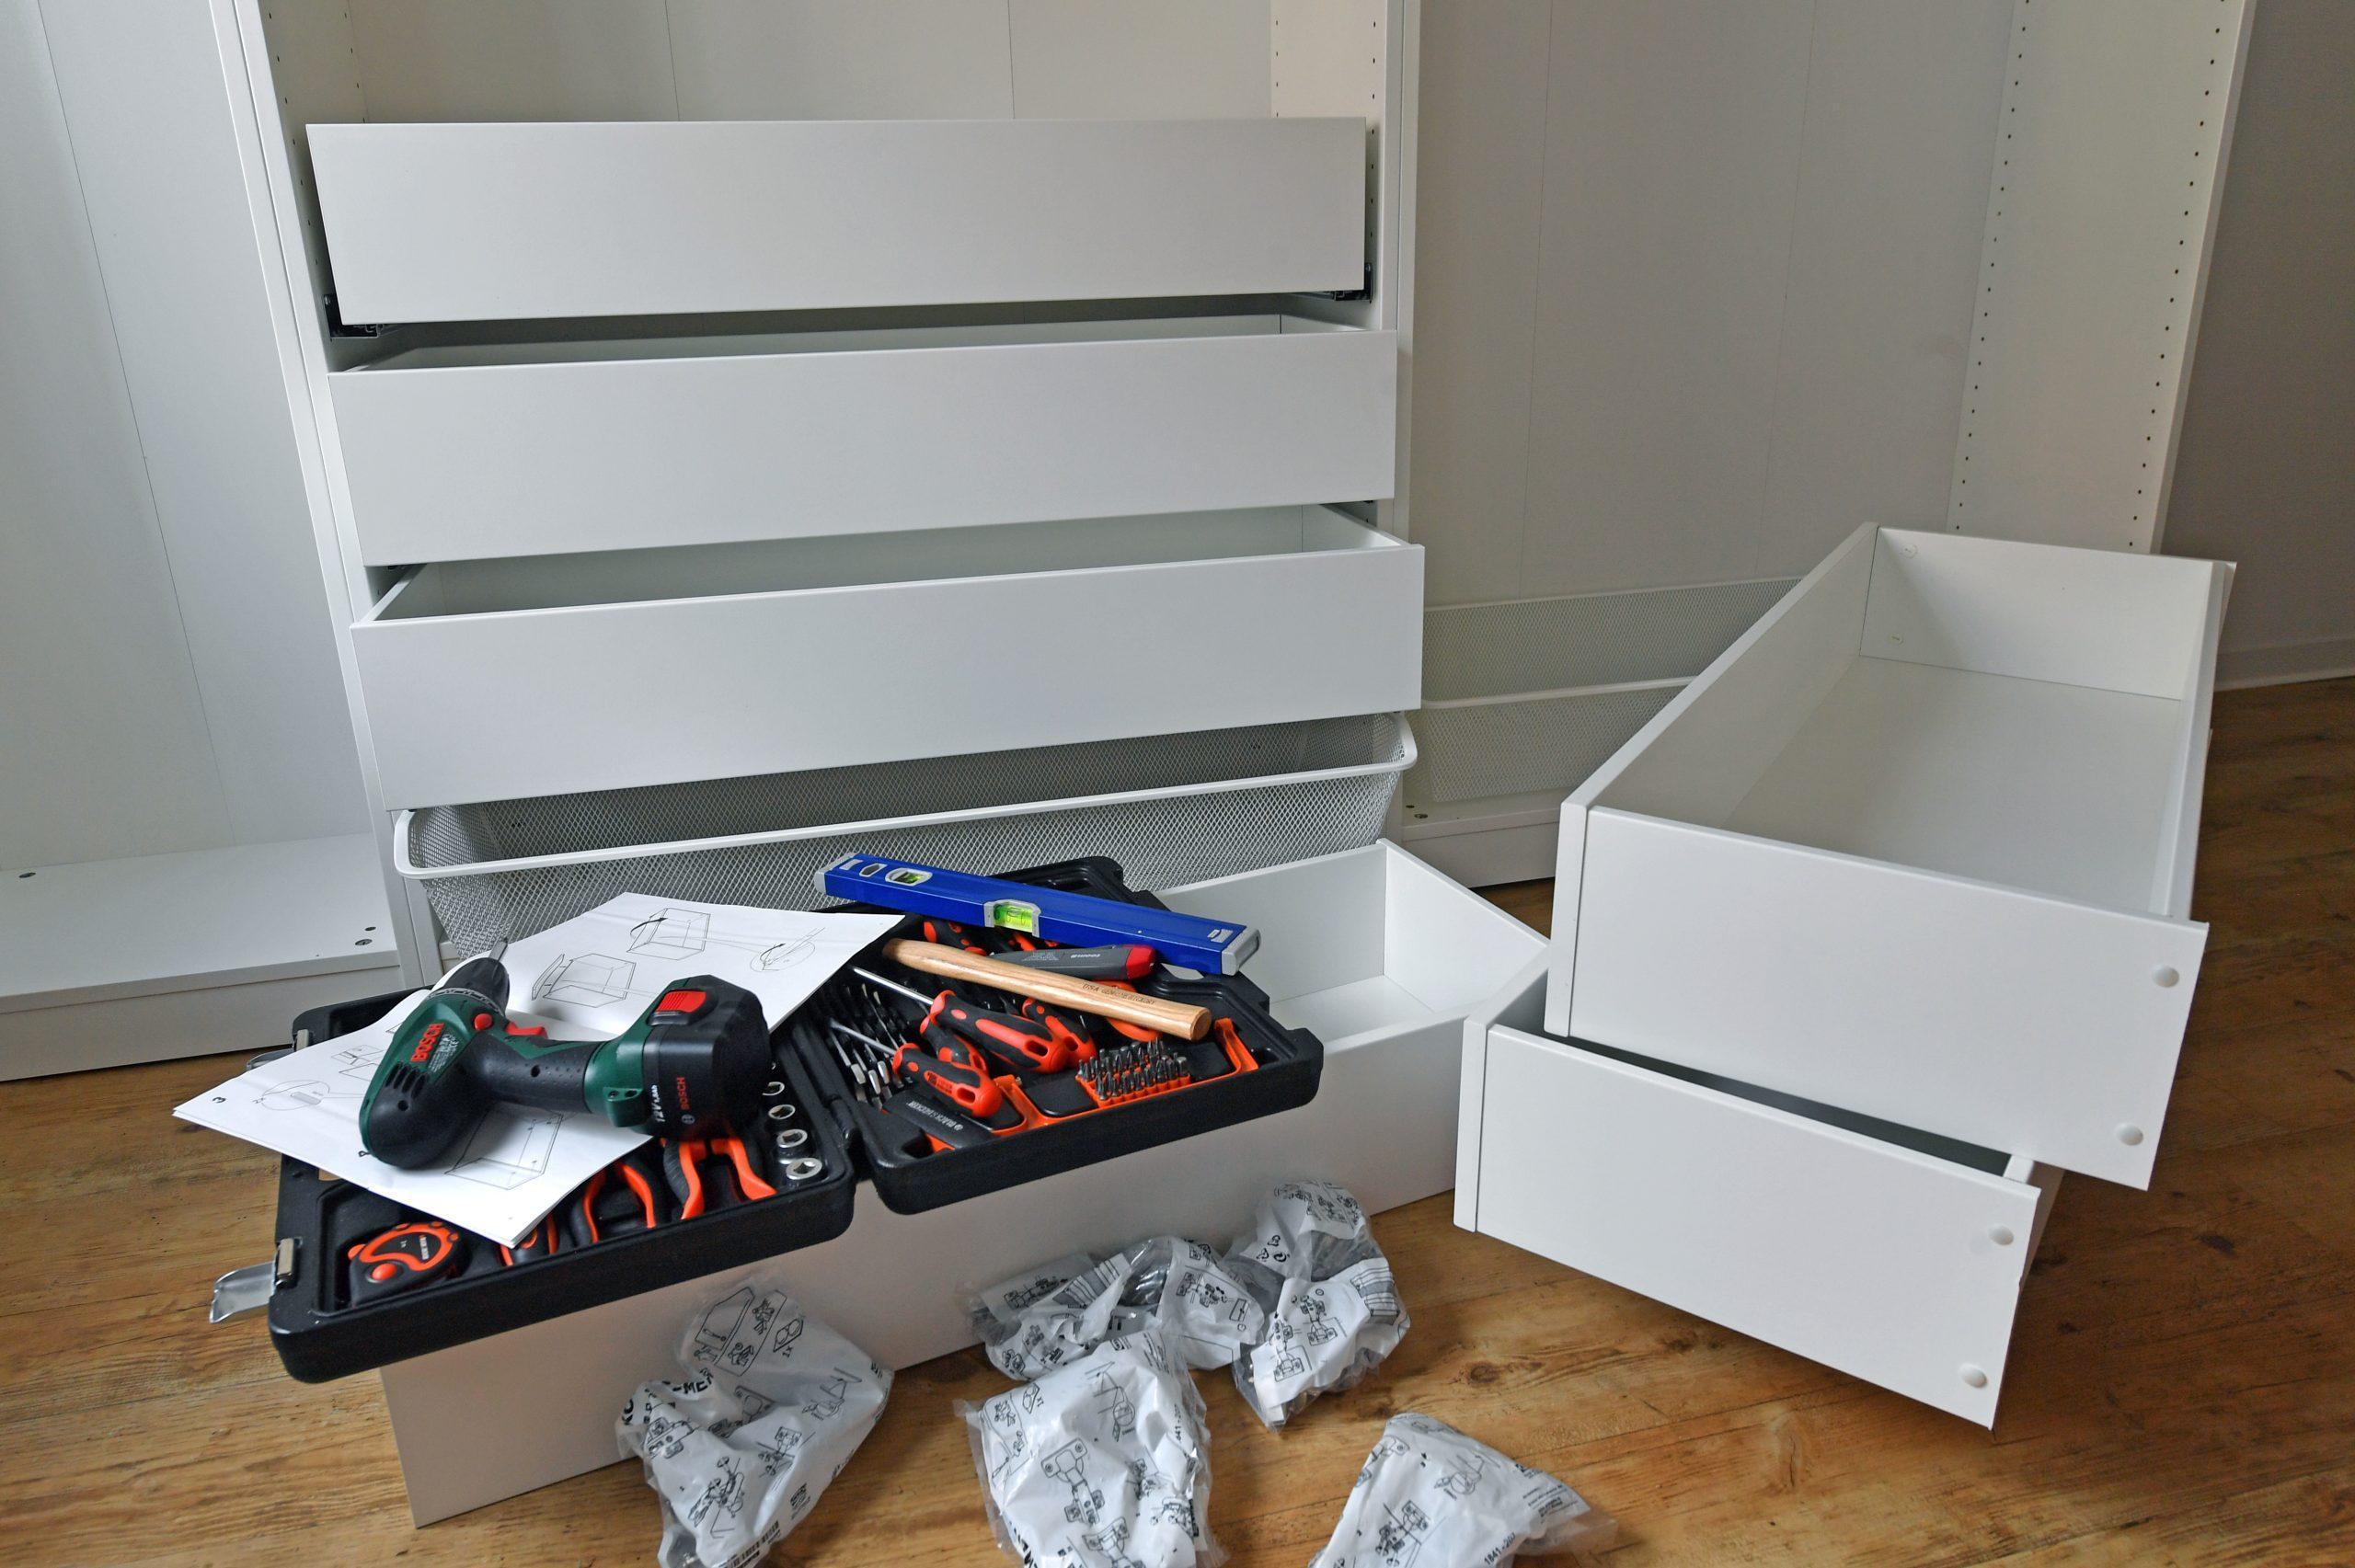 7 ways to be more organised at home - IKEA